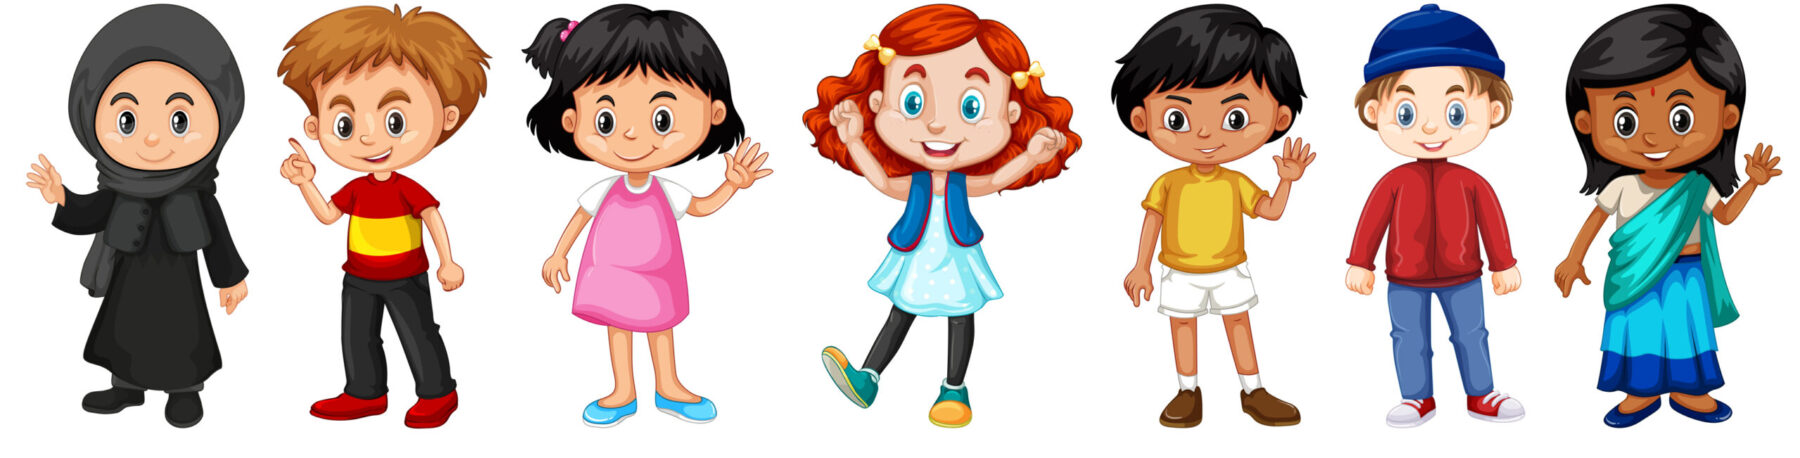 Set of multicultural kids character